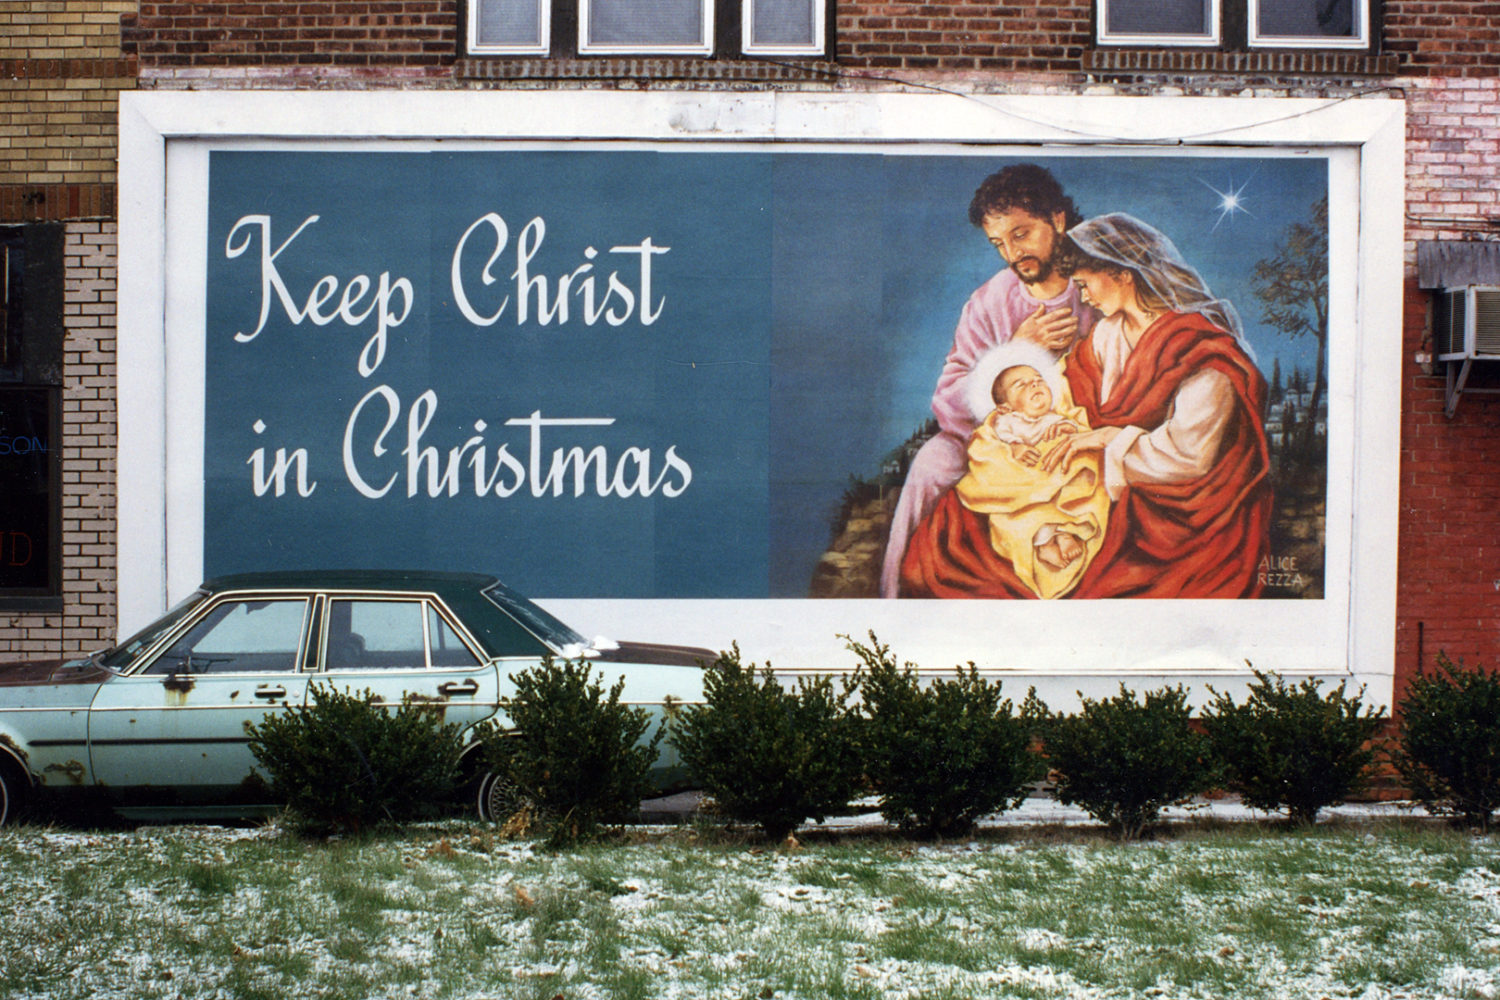 "Keep Christ in Christmas" billboard on Main and Hall Street in Rochester, New York